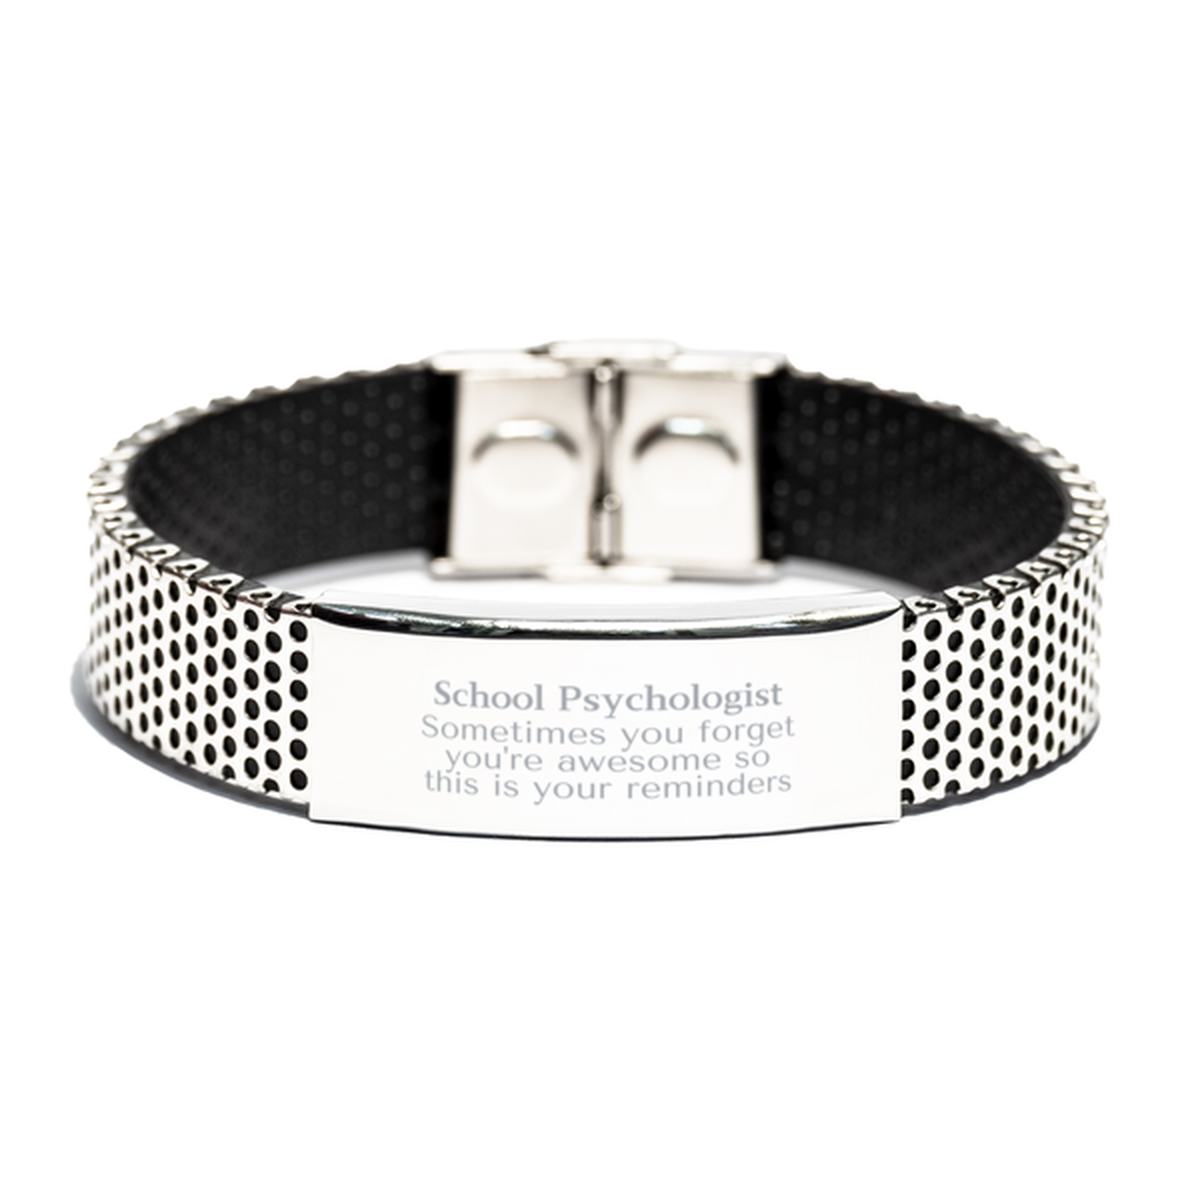 Sentimental School Psychologist Stainless Steel Bracelet, School Psychologist Sometimes you forget you're awesome so this is your reminders, Graduation Christmas Birthday Gifts for School Psychologist, Men, Women, Coworkers